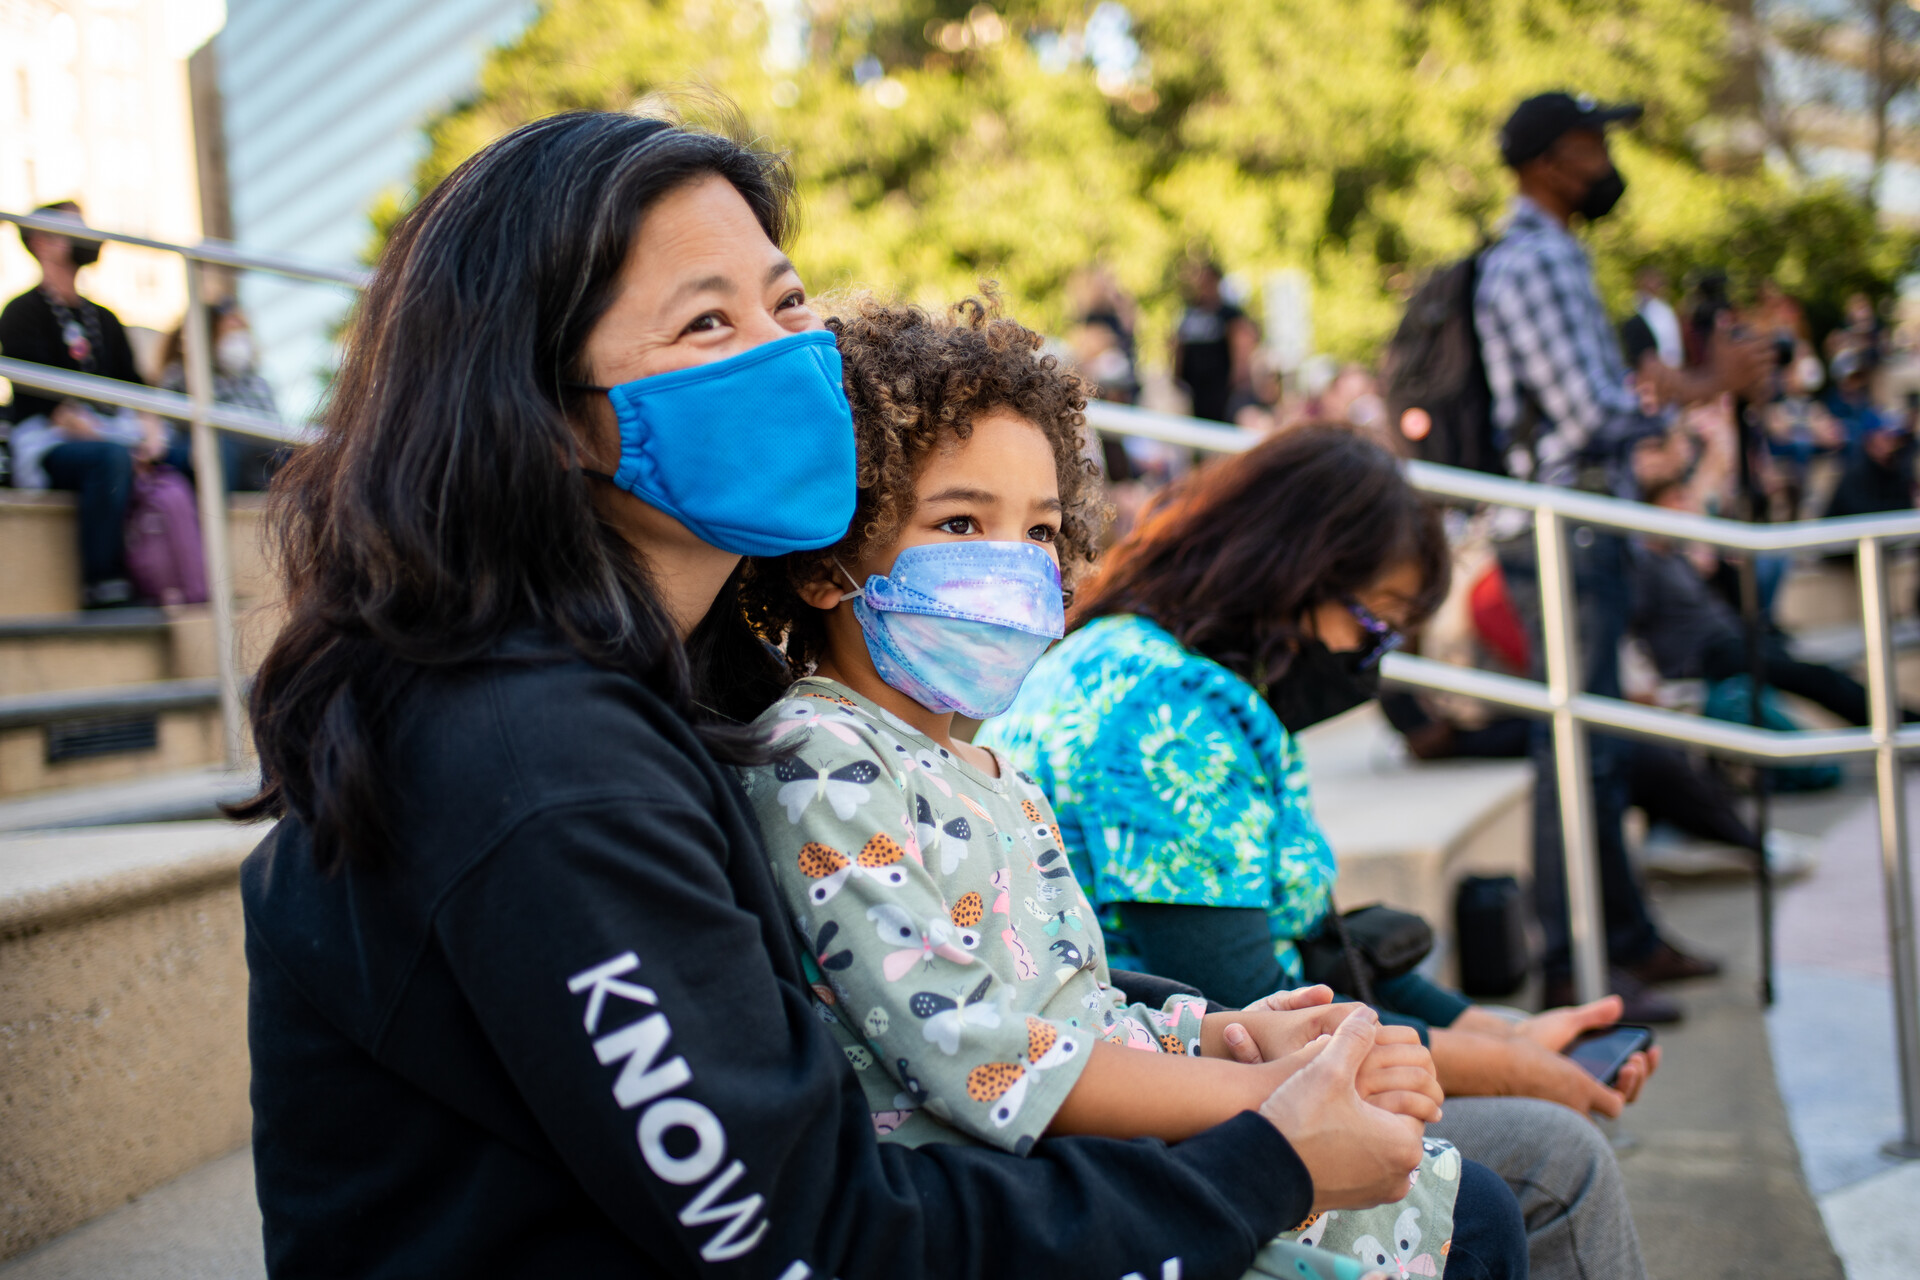 masked woman with smiling eyes holds her young daughter also wearing a mask outside, with other attendees in the background